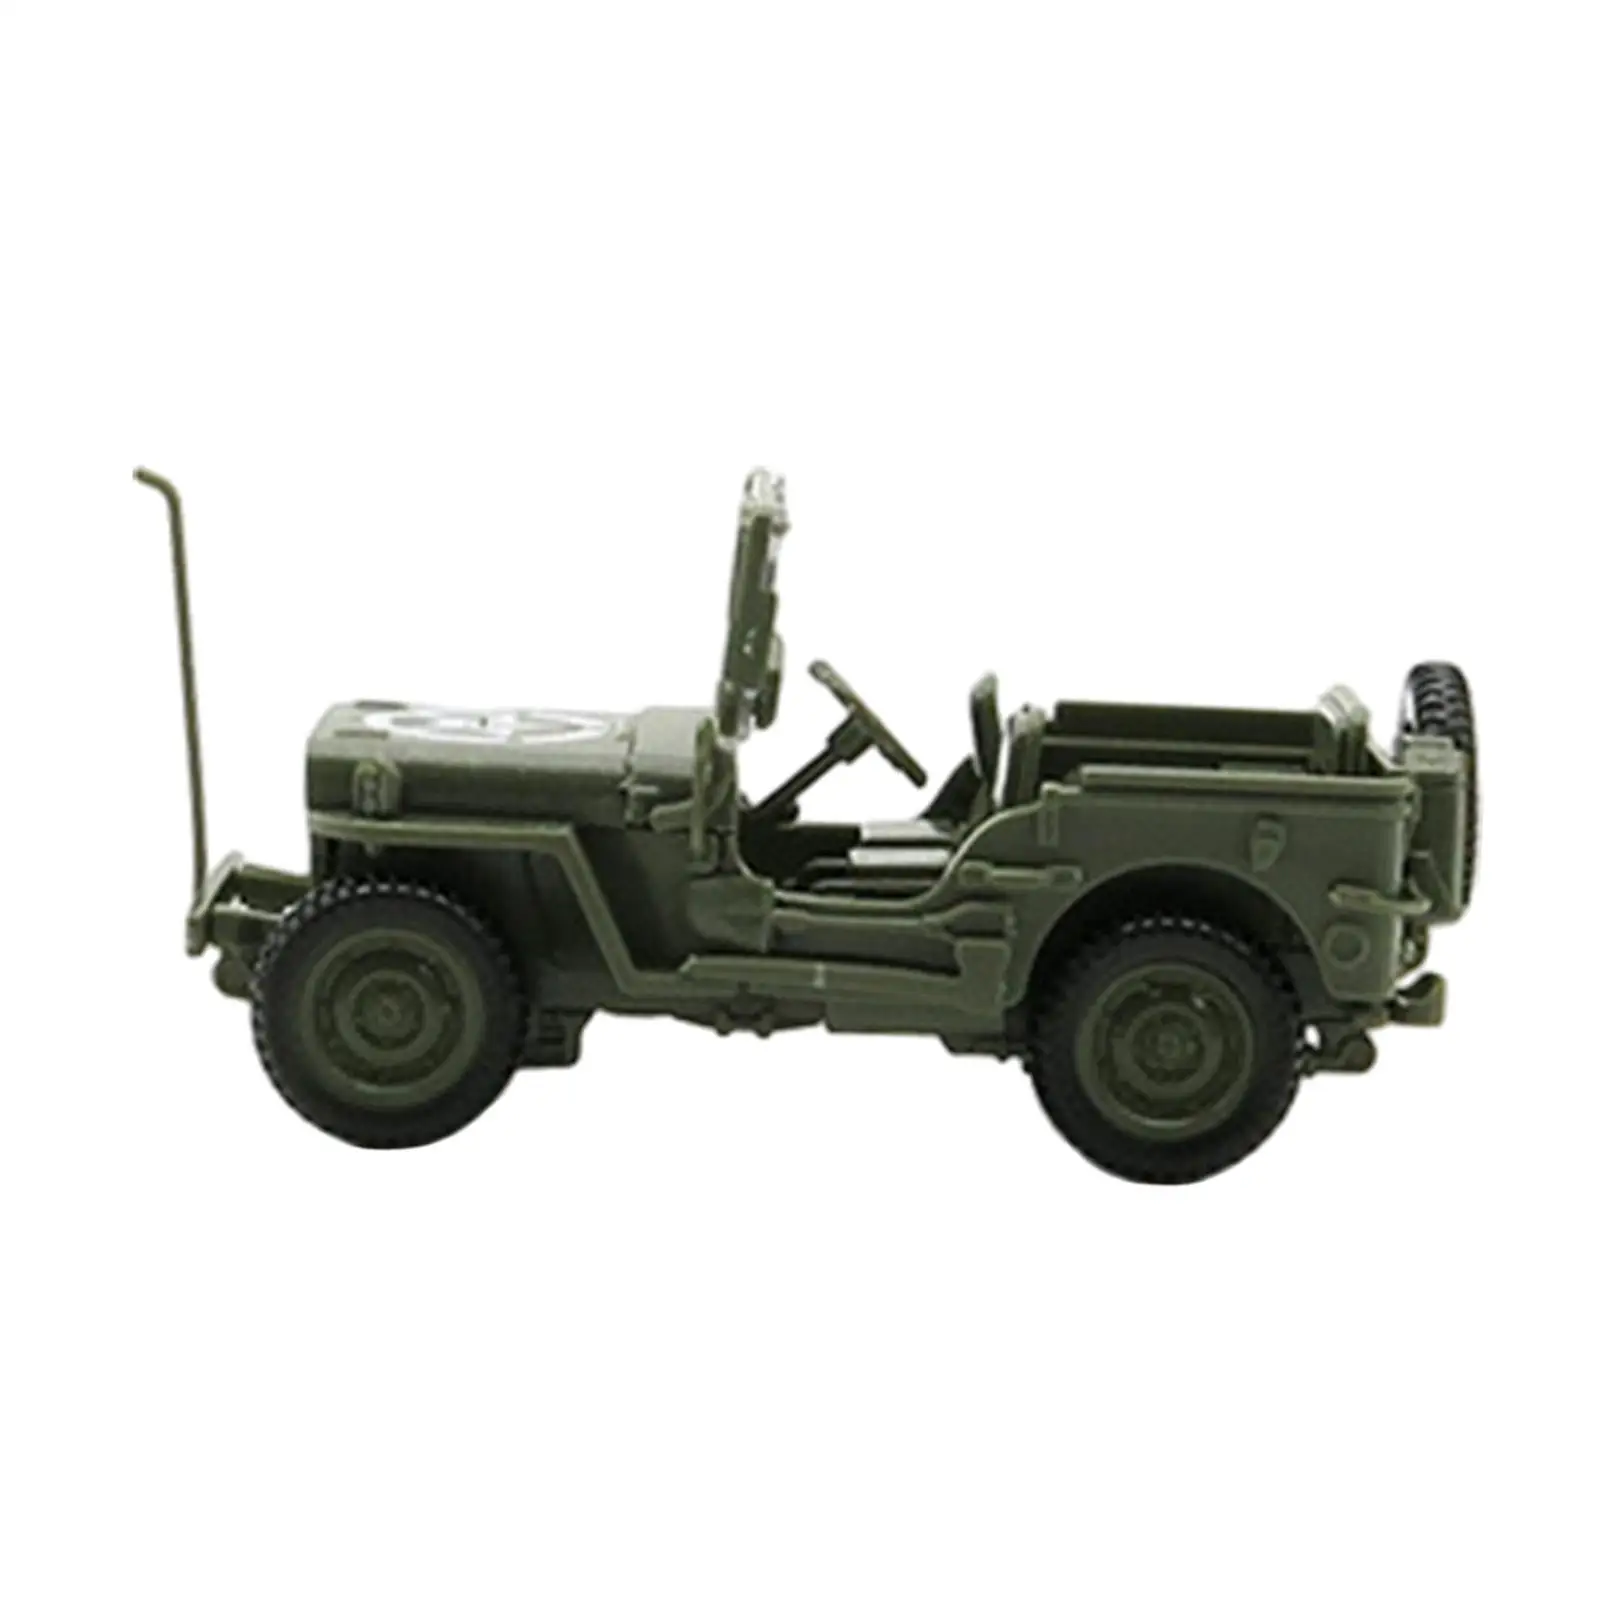 1/48 DIY Assembly Vehicle Model Desk Decor DIY Model Building Collection for Men Adults Friends Teens Holiday Gifts